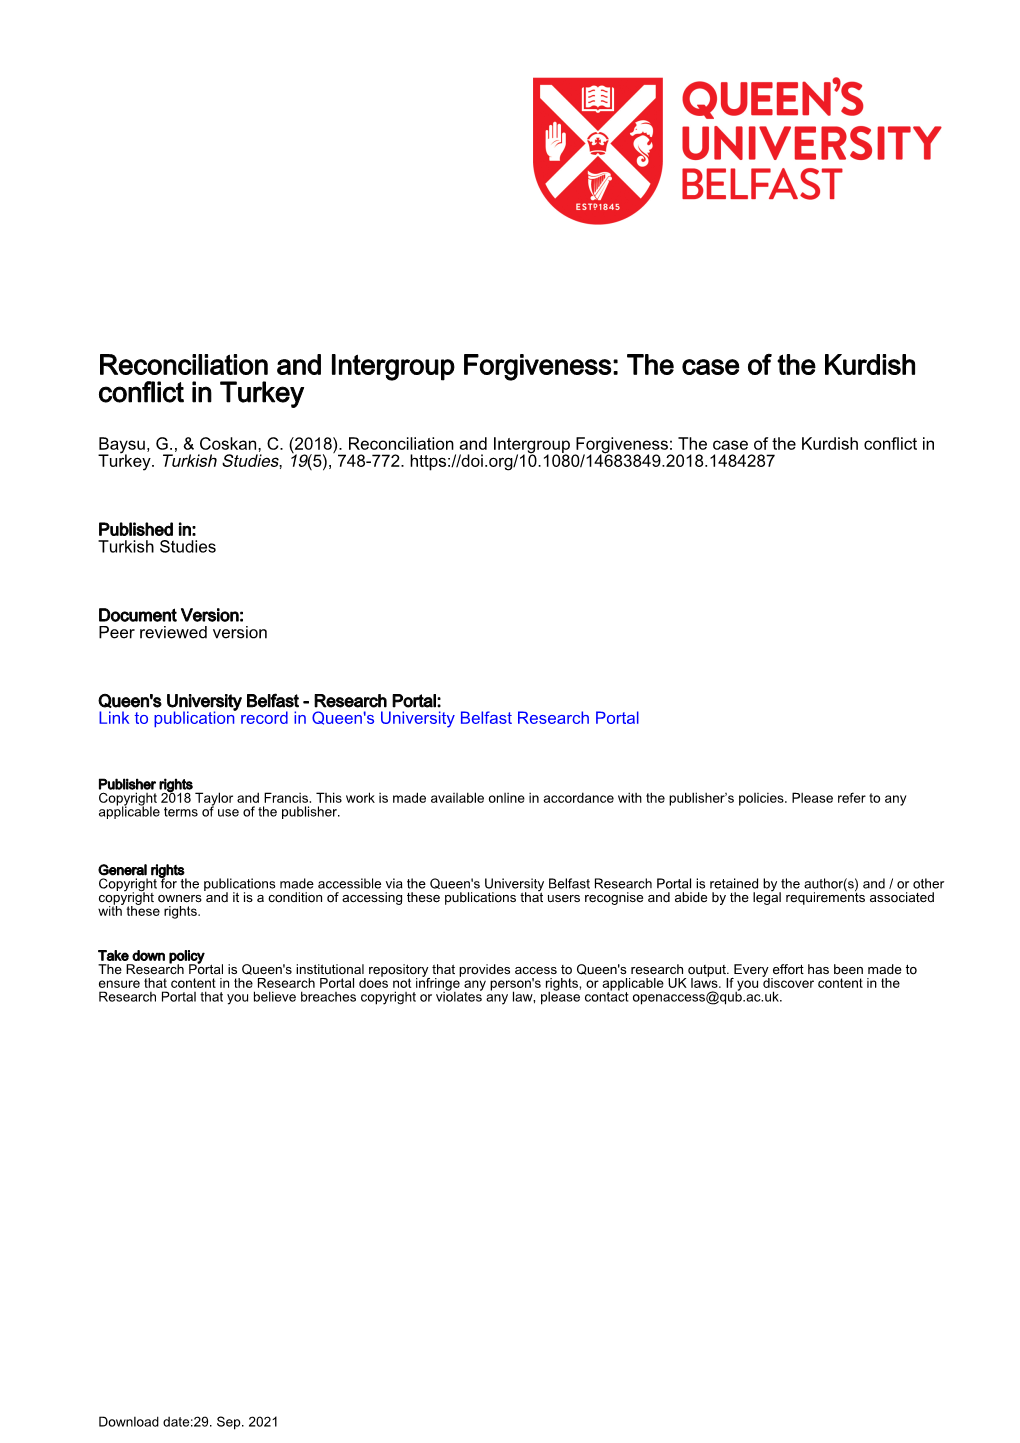 Reconciliation and Intergroup Forgiveness: the Case of the Kurdish Conflict in Turkey